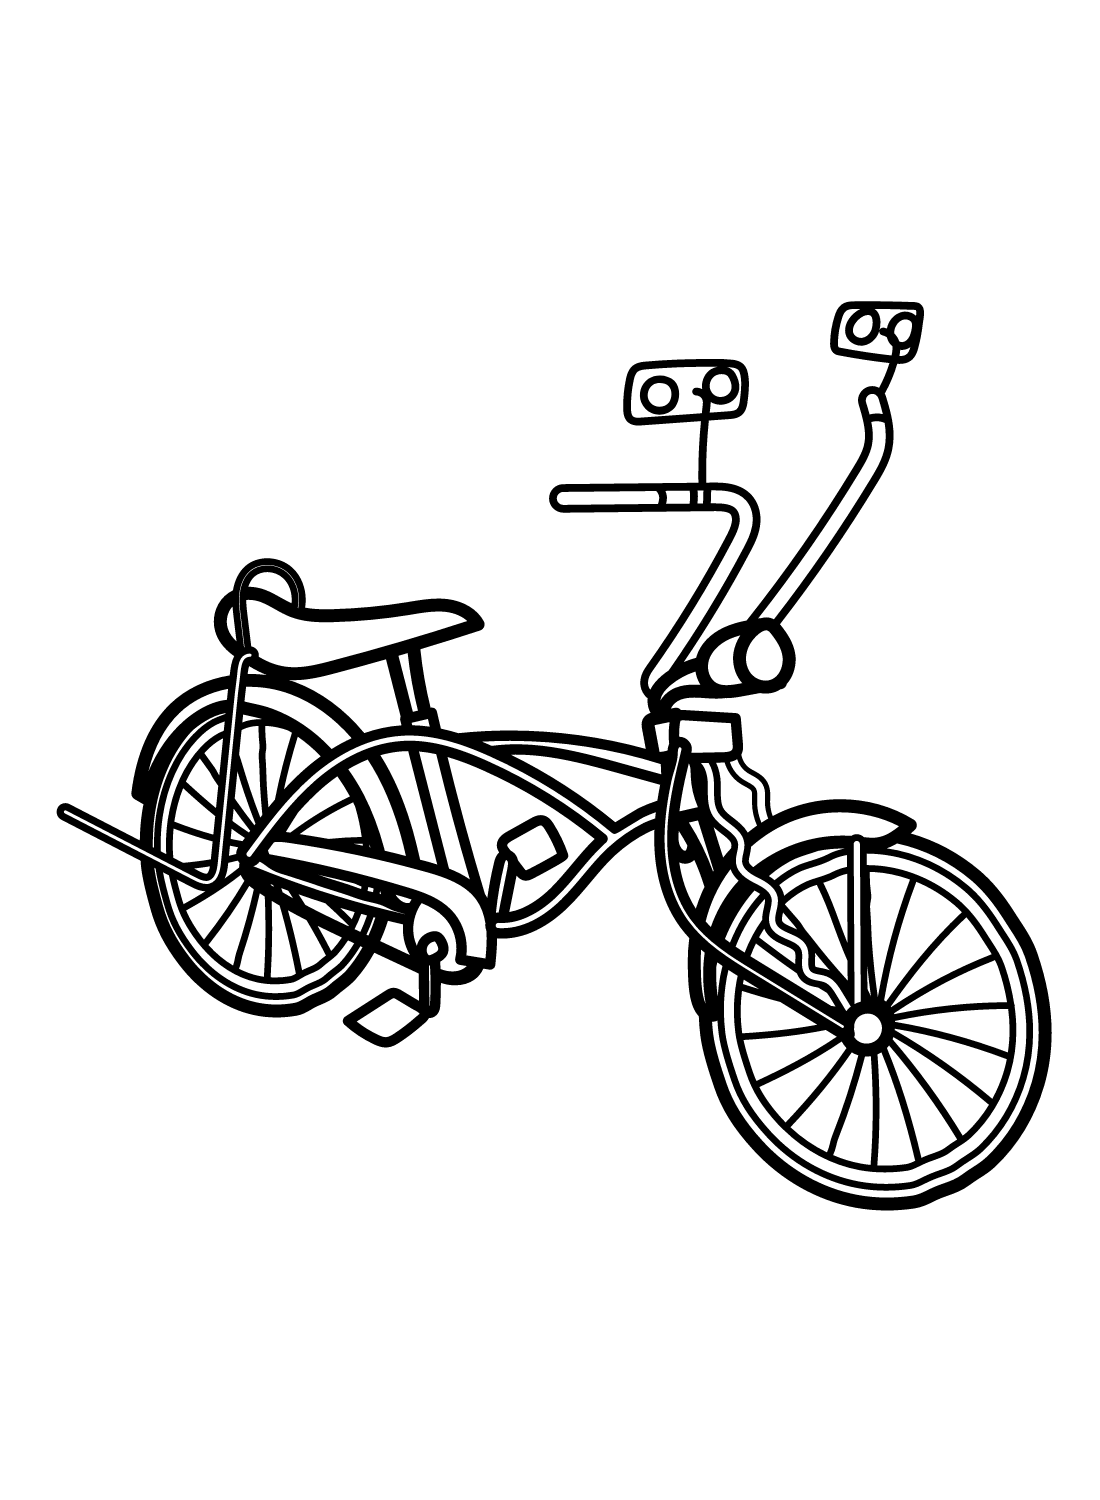 Lowrider Bicycle Coloring Page